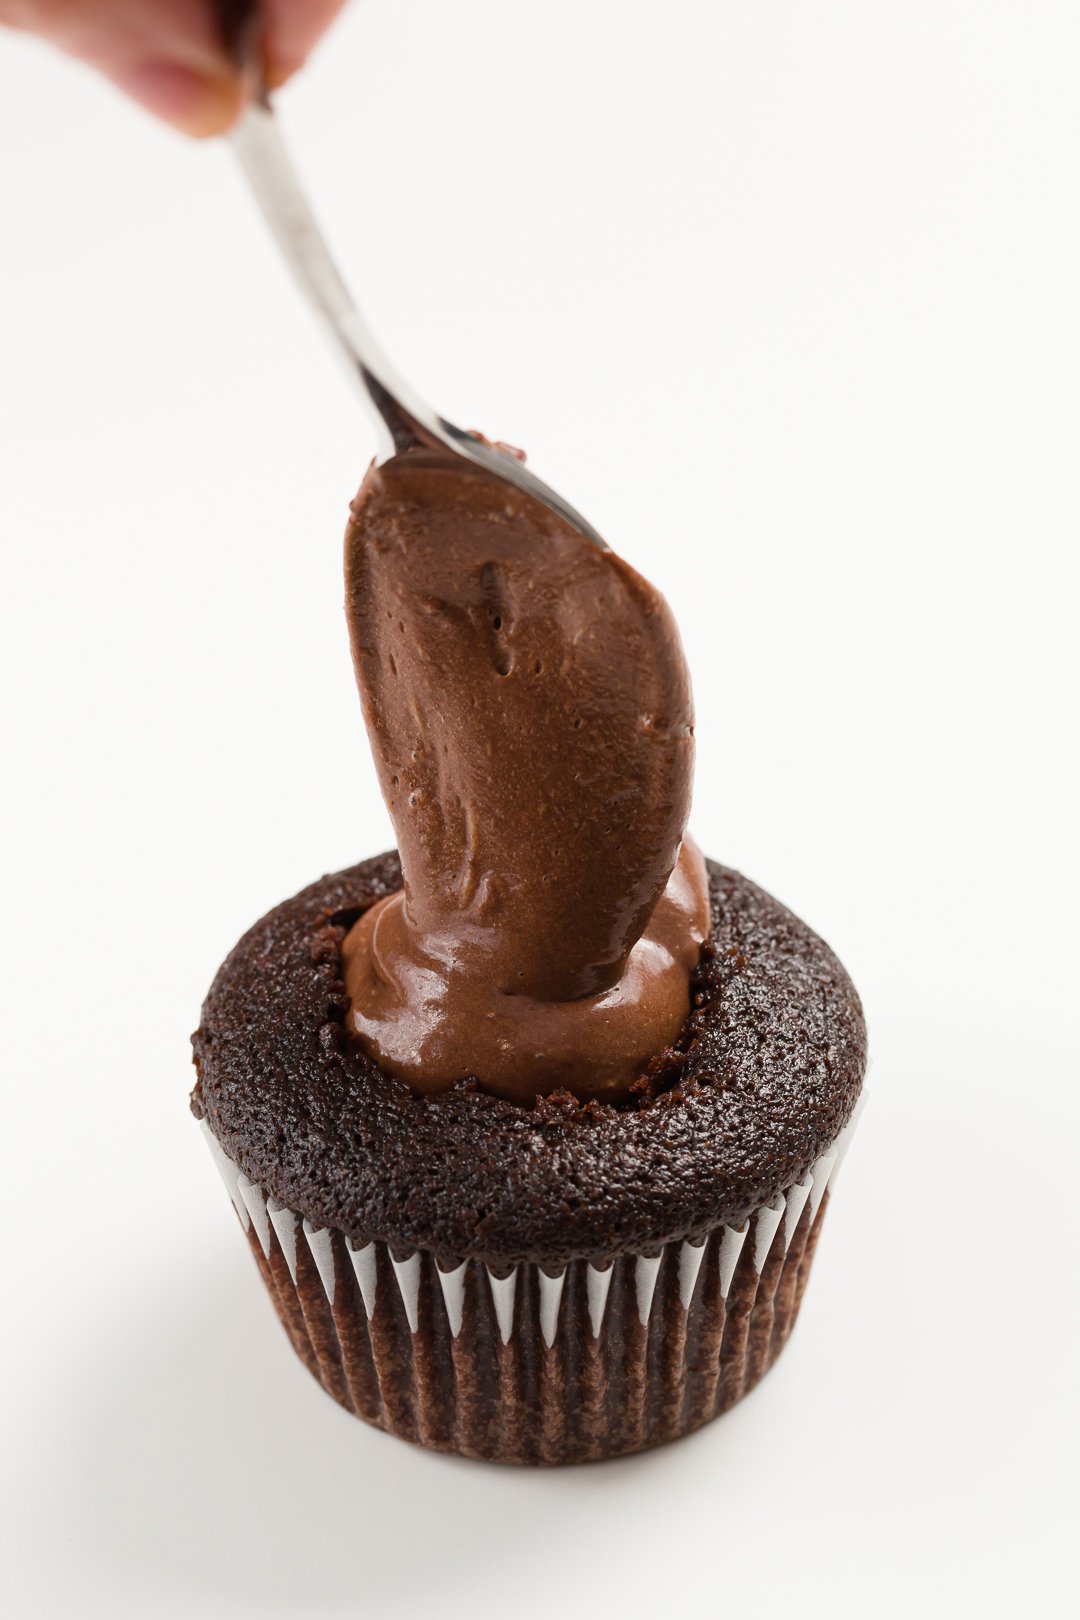 filling a cupcake with ganache